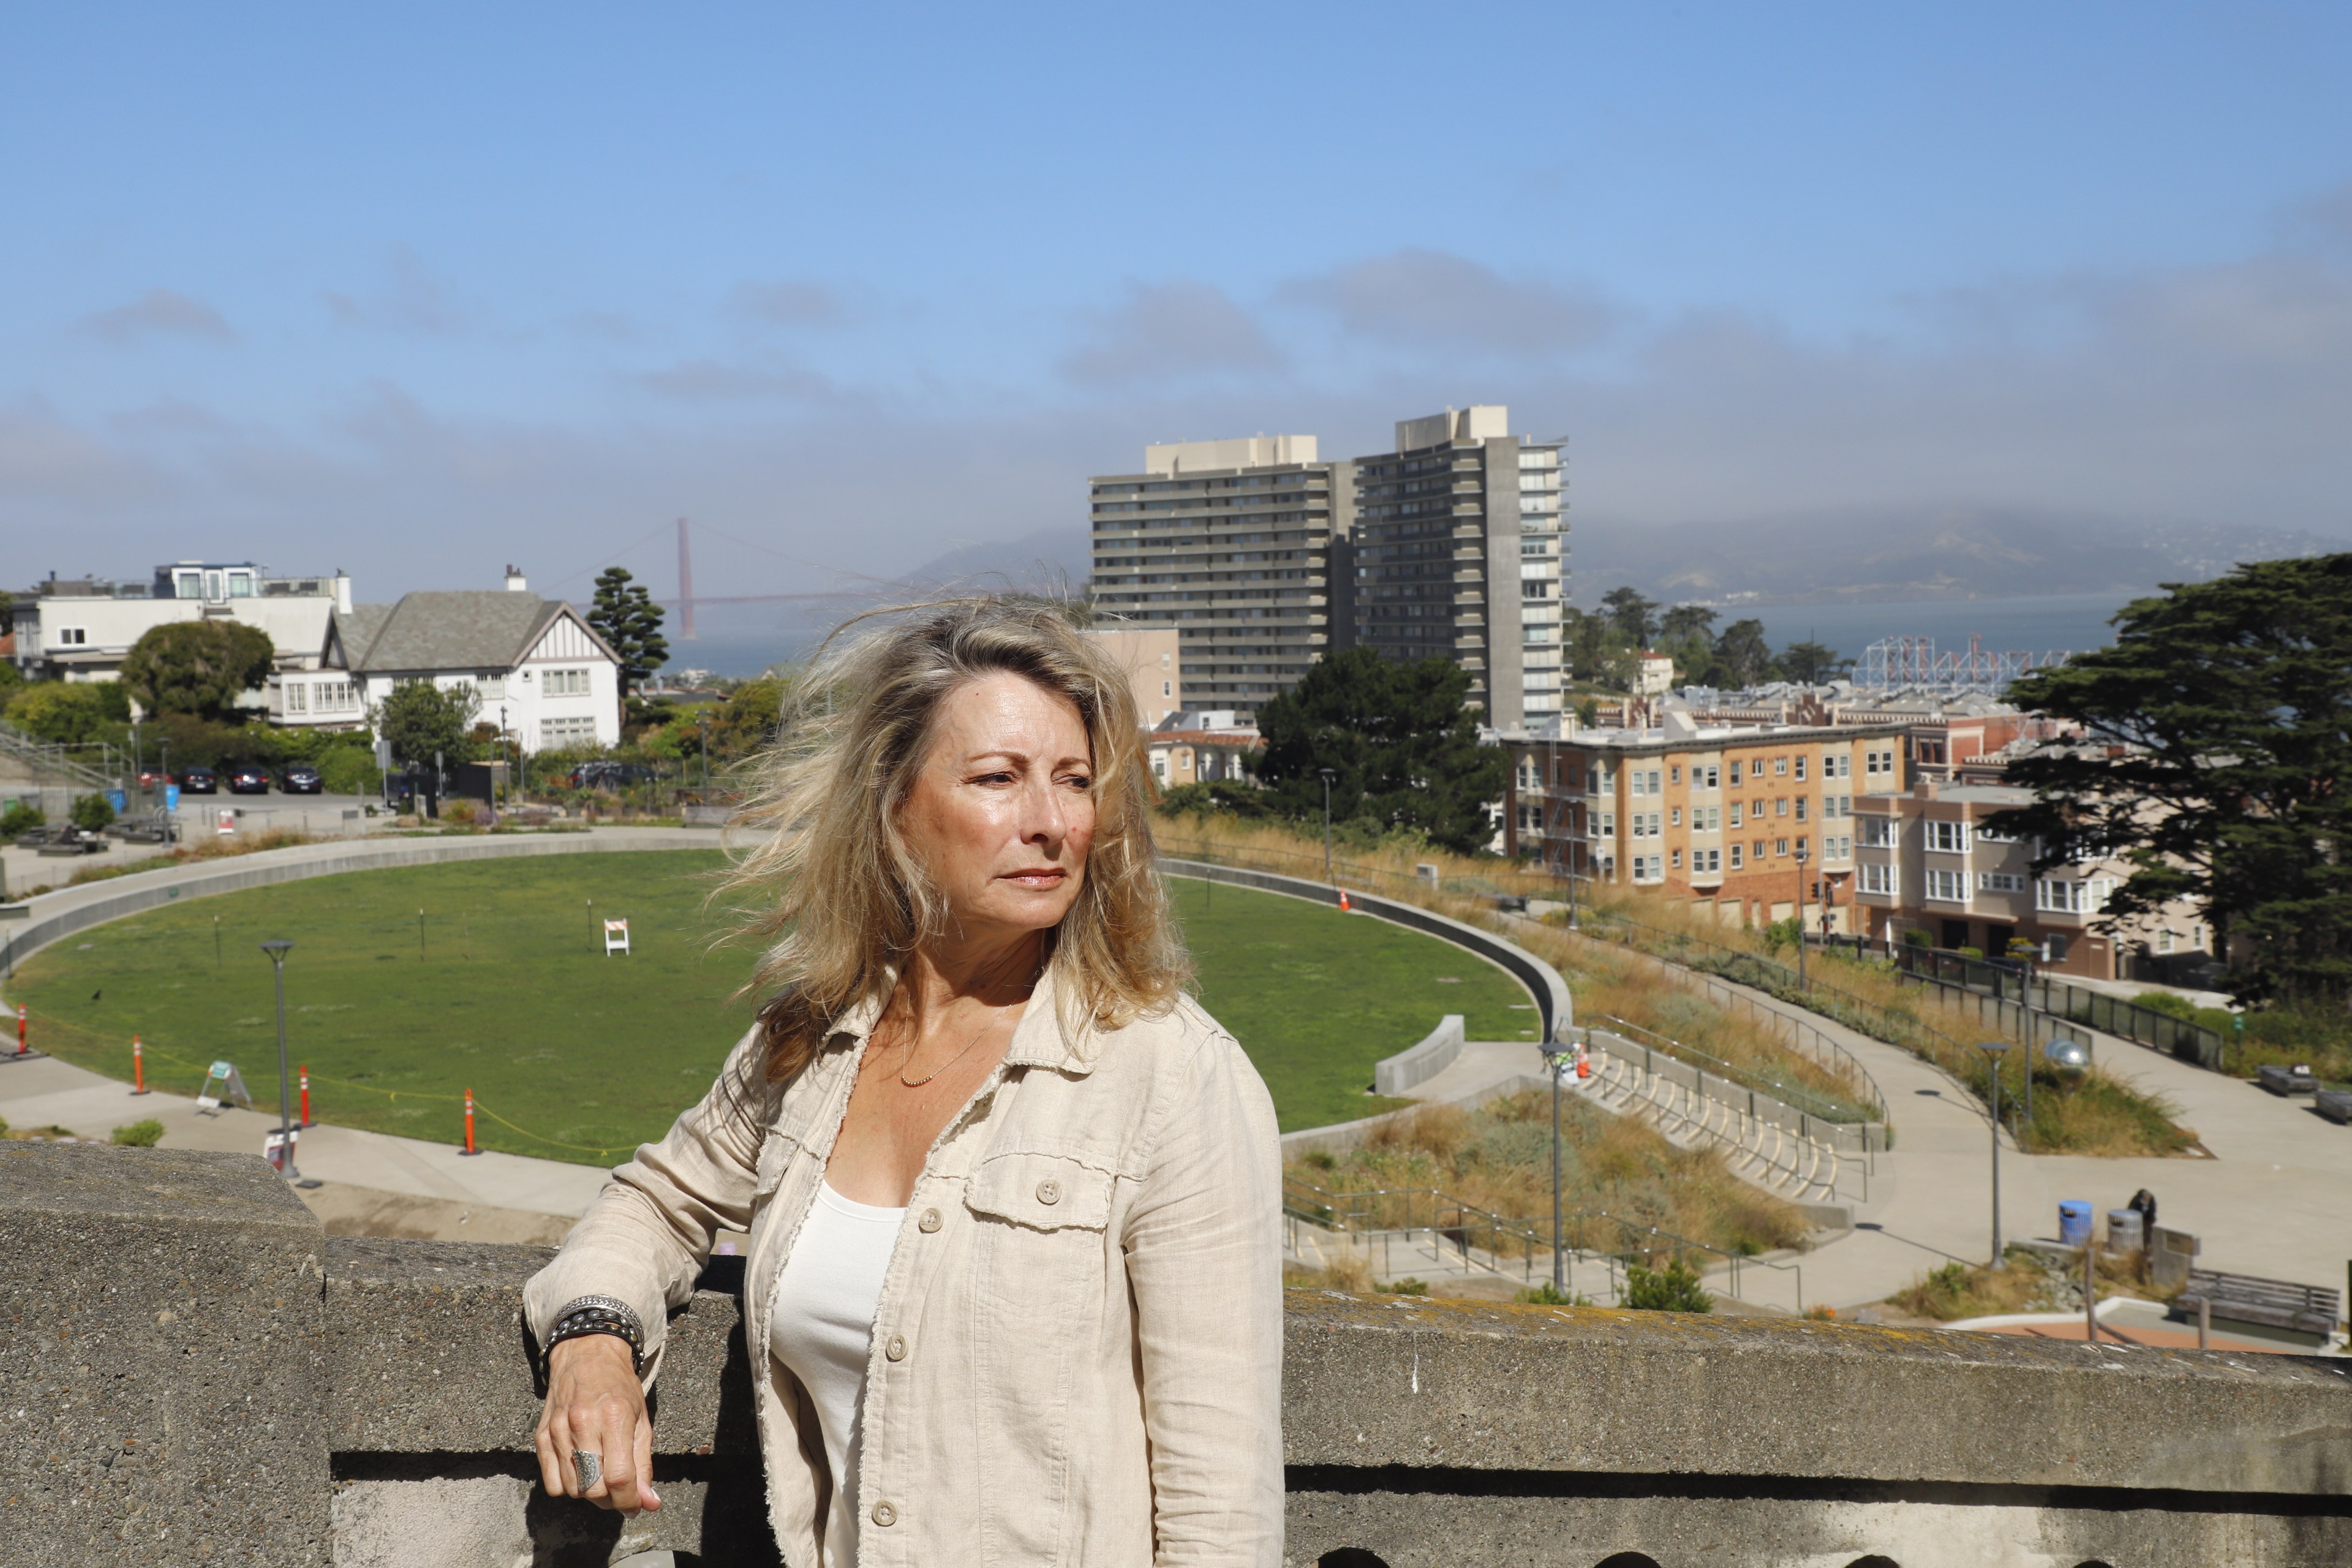 A woman with long hair stands near a concrete railing, overlooking a park and cityscape with a mix of buildings, including tall apartments and houses. The Golden Gate Bridge is visible in the background.